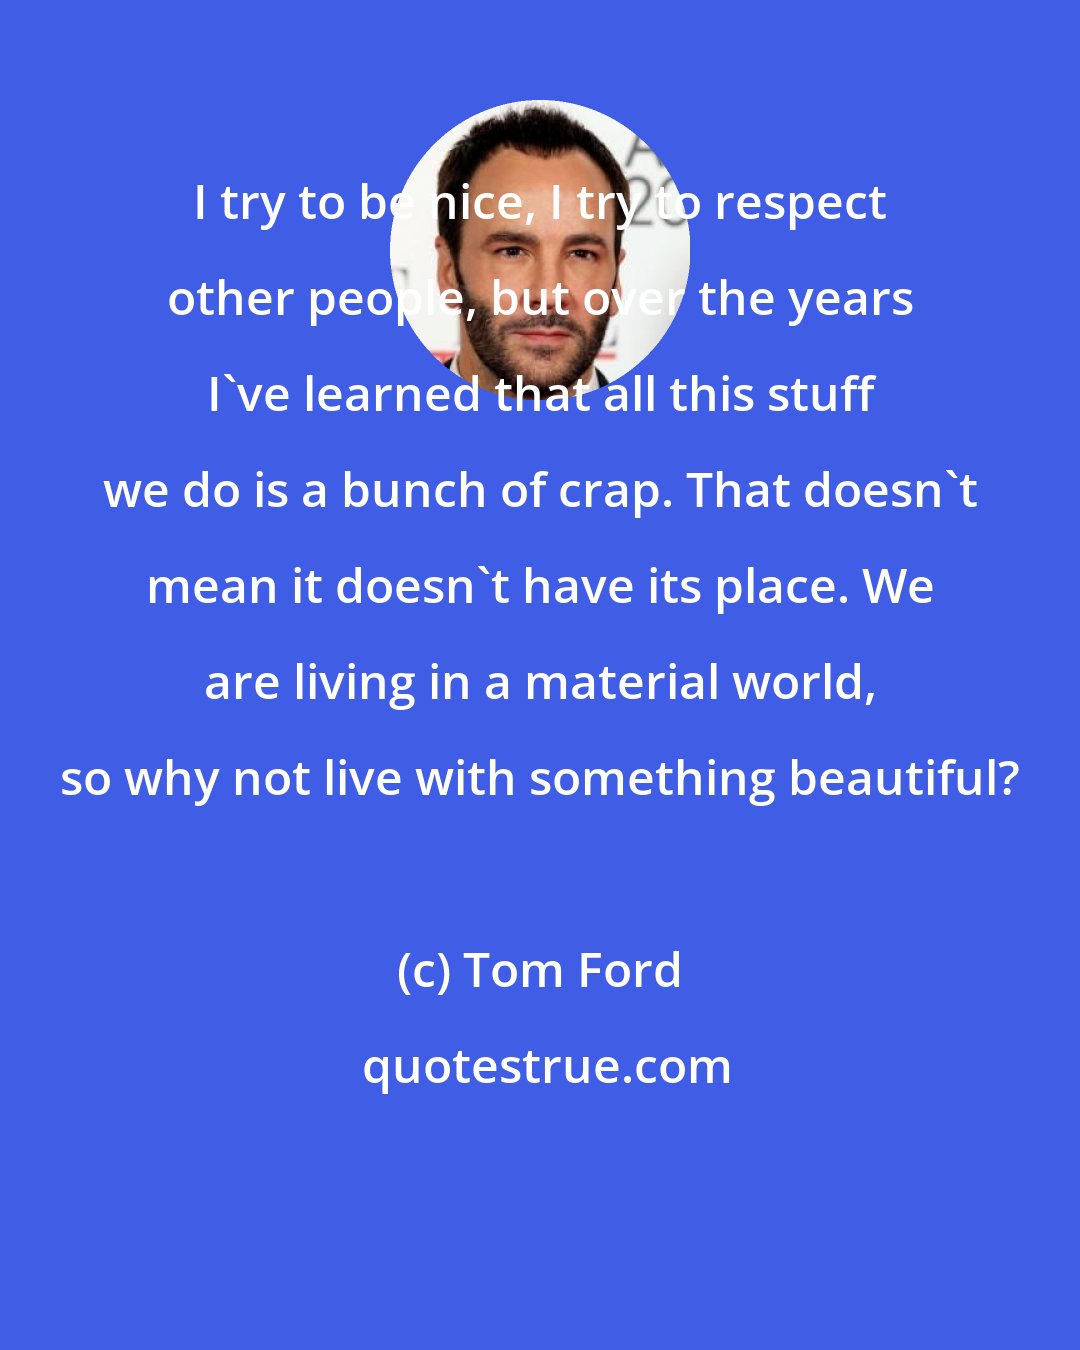 Tom Ford: I try to be nice, I try to respect other people, but over the years I've learned that all this stuff we do is a bunch of crap. That doesn't mean it doesn't have its place. We are living in a material world, so why not live with something beautiful?